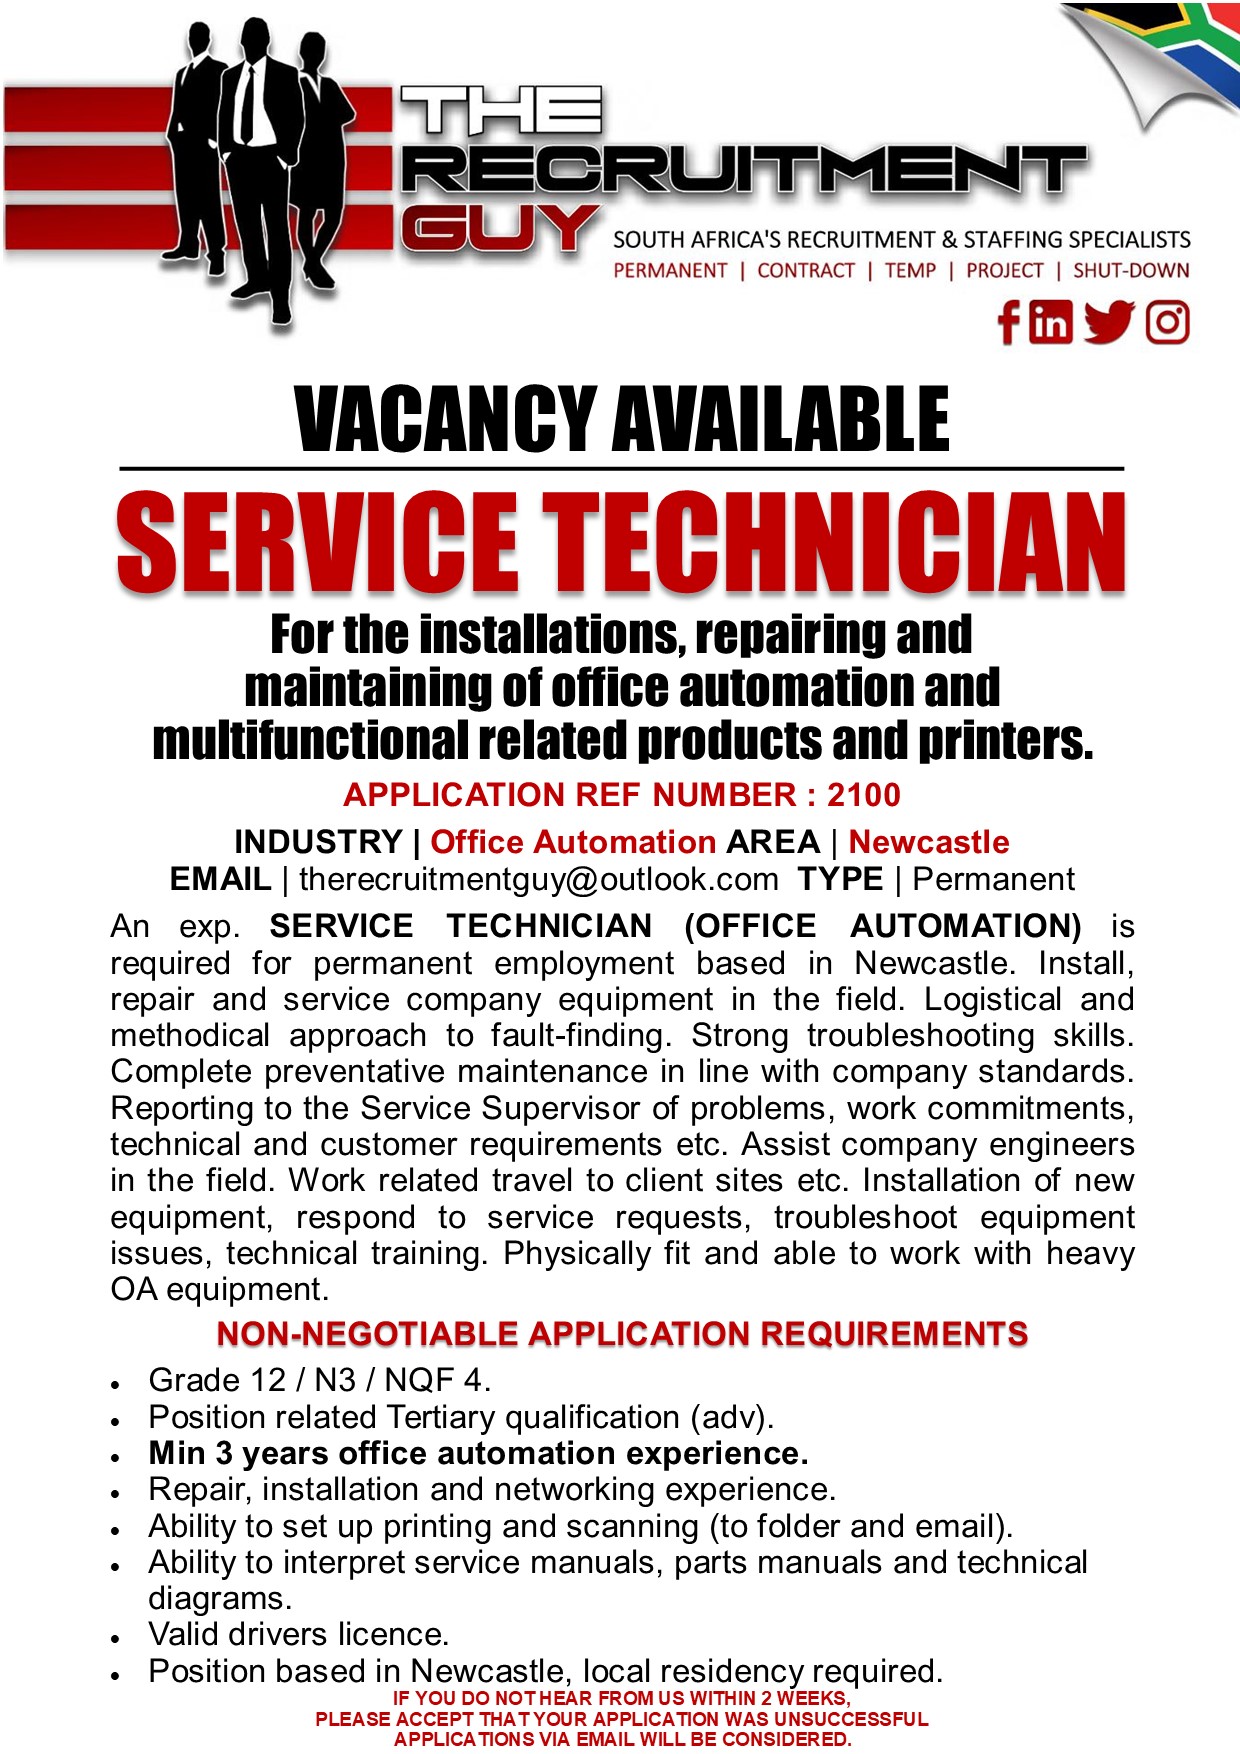 GUY SOUTH AFRICA'S RECRUITMENT & STAFFING SPECIALISTS

PERMANENT | CONTRACT | TEMP | PROJECT | SHUT-DOWN

fRWEO
VACANCY AVAILABLE
SERVICE TECHNICIAN

For the installations, repairing and
maintaining of office automation and

multifunctional related products and printers.
APPLICATION REF NUMBER : 2100

INDUSTRY | Office Automation AREA | Newcastle
EMAIL | therecruitmentguy@outlook.com TYPE | Permanent

An exp. SERVICE TECHNICIAN (OFFICE AUTOMATION) is
required for permanent employment based in Newcastle. Install,
repair and service company equipment in the field. Logistical and
methodical approach to fault-finding. Strong troubleshooting skills.
Complete preventative maintenance in line with company standards.
Reporting to the Service Supervisor of problems, work commitments,
technical and customer requirements etc. Assist company engineers
in the field. Work related travel to client sites etc. Installation of new
equipment, respond to service requests, troubleshoot equipment
issues, technical training. Physically fit and able to work with heavy
OA equipment.
NON-NEGOTIABLE APPLICATION REQUIREMENTS

Grade 12 /N3/ NQF 4.

Position related Tertiary qualification (adv).

Min 3 years office automation experience.

Repair, installation and networking experience.

Ability to set up printing and scanning (to folder and email).
Ability to interpret service manuals, parts manuals and technical
diagrams.

. Valid drivers licence.

+ Position based in Newcastle, local residency required.

IF YOU DO NOTHEAR FROM US WITHIN 2 WEEKS,

PLEASE ACCEPT THAT YOUR APPLICATION WAS UNSUCCESSFUL
APPLICATIONS VIA EMAIL WILL BE CONSIDERED.